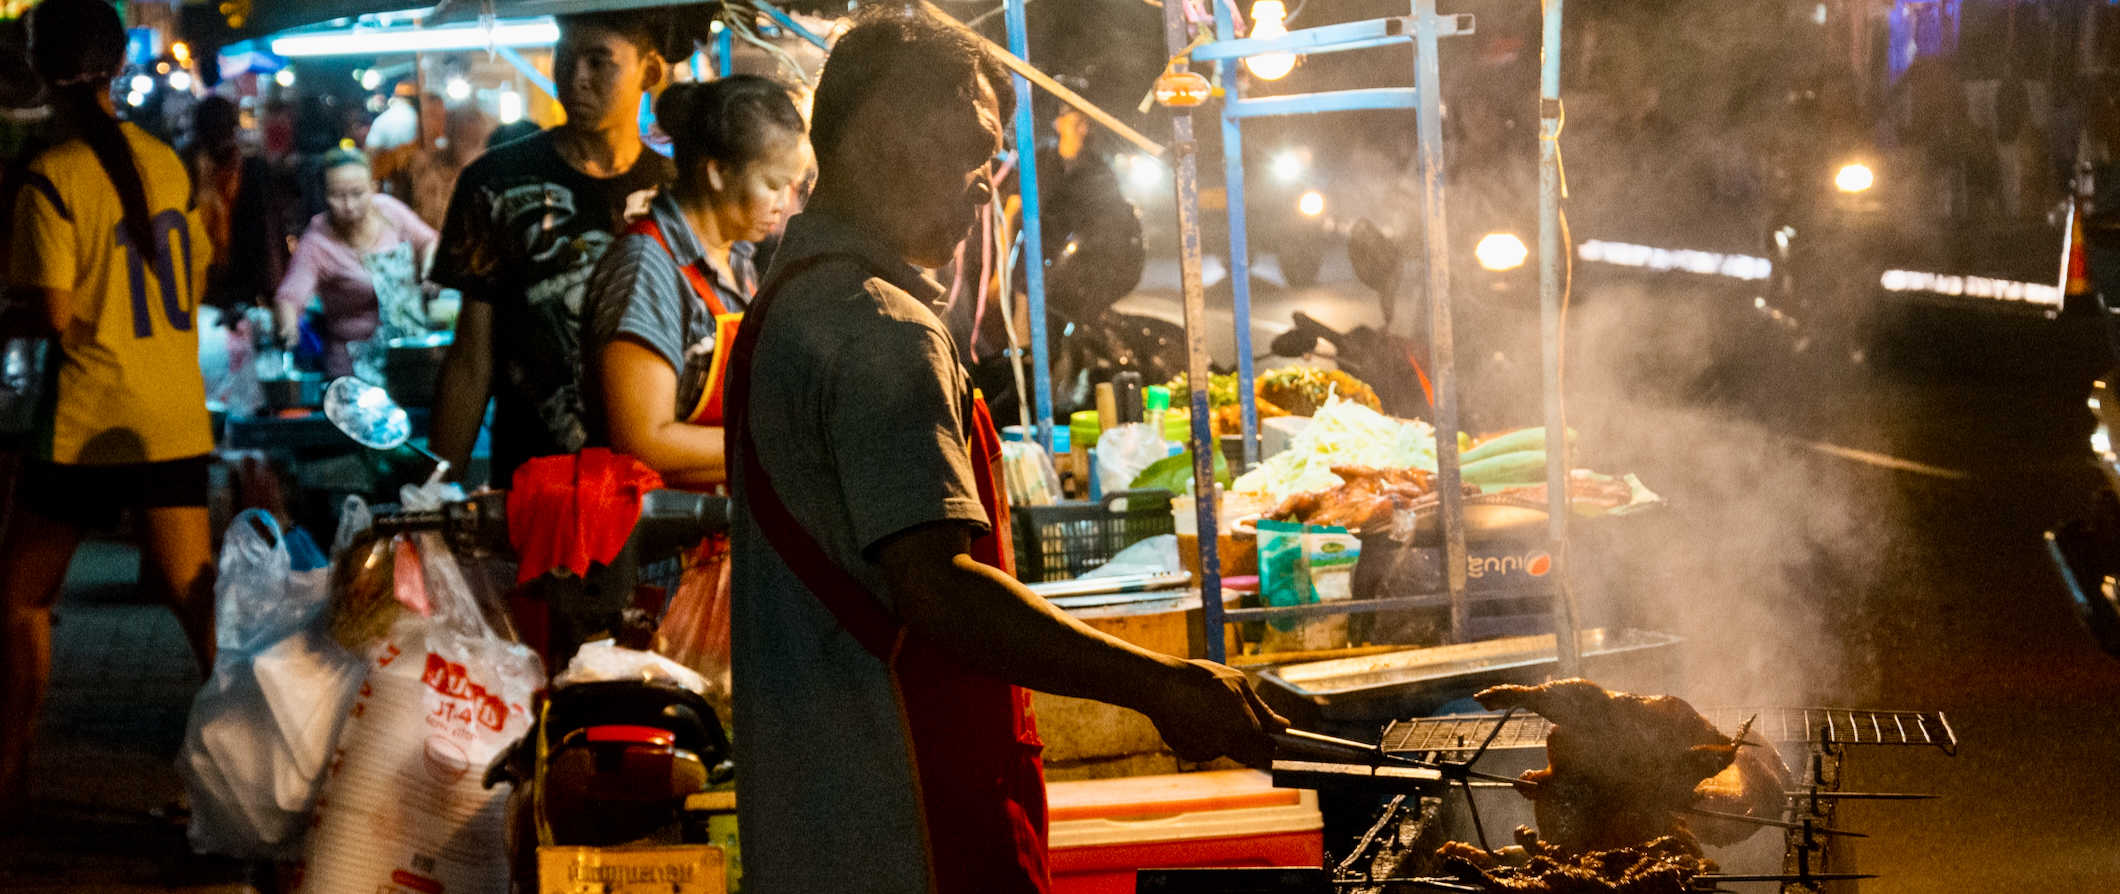 A local Laos street food vendor cooking during a night market in Vientiane, Laos